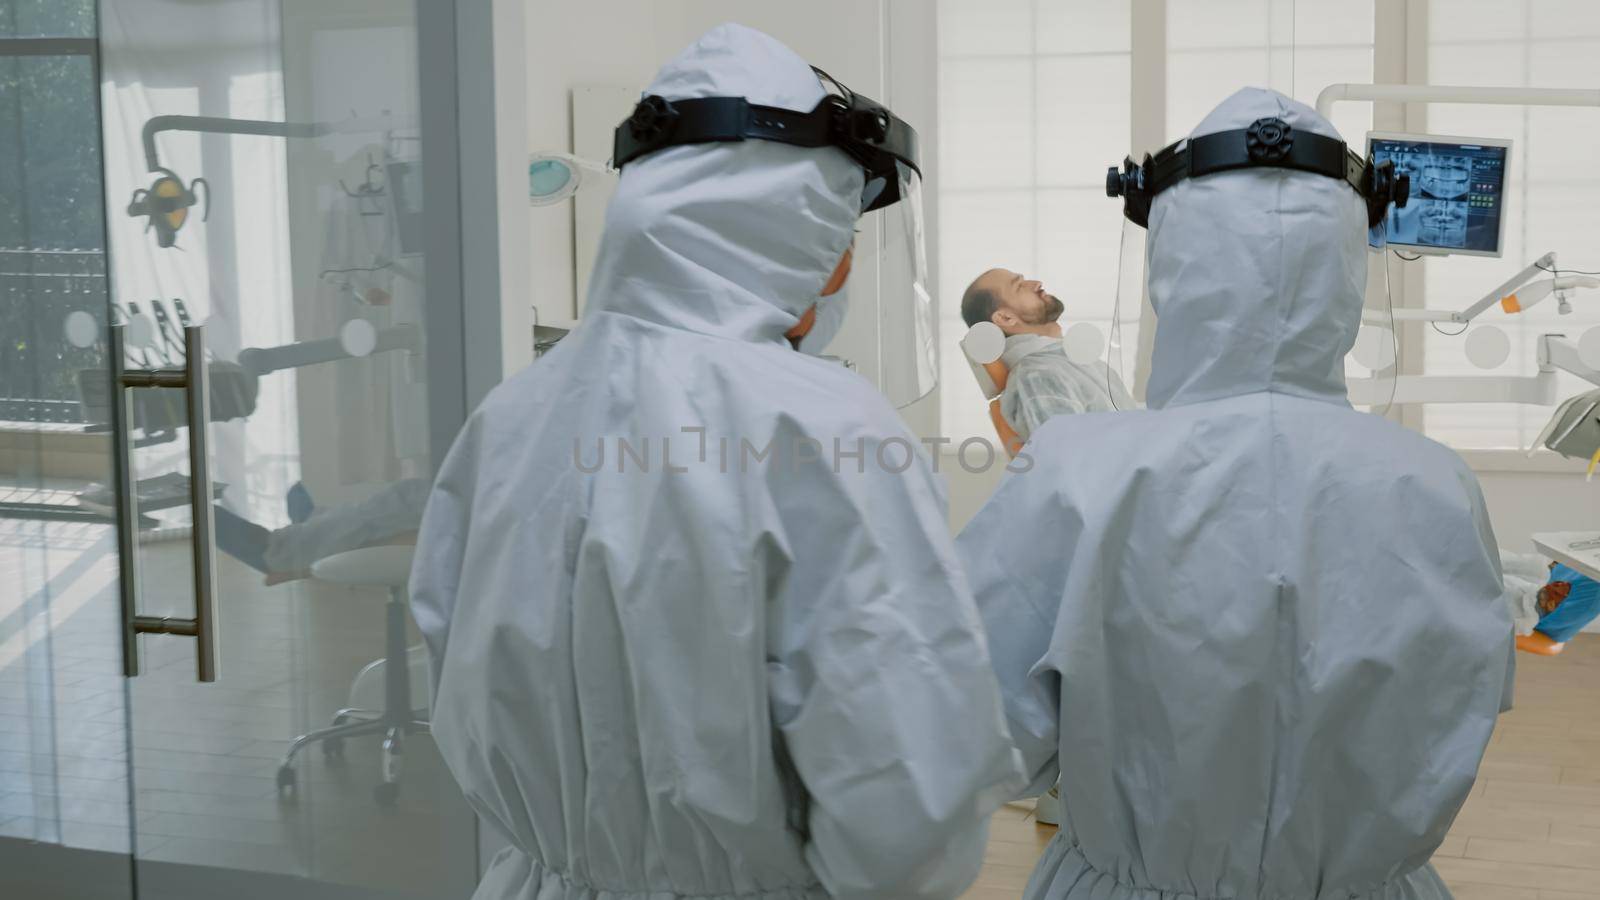 Orthodontist with ppe suit preparing for patient consultation by DCStudio